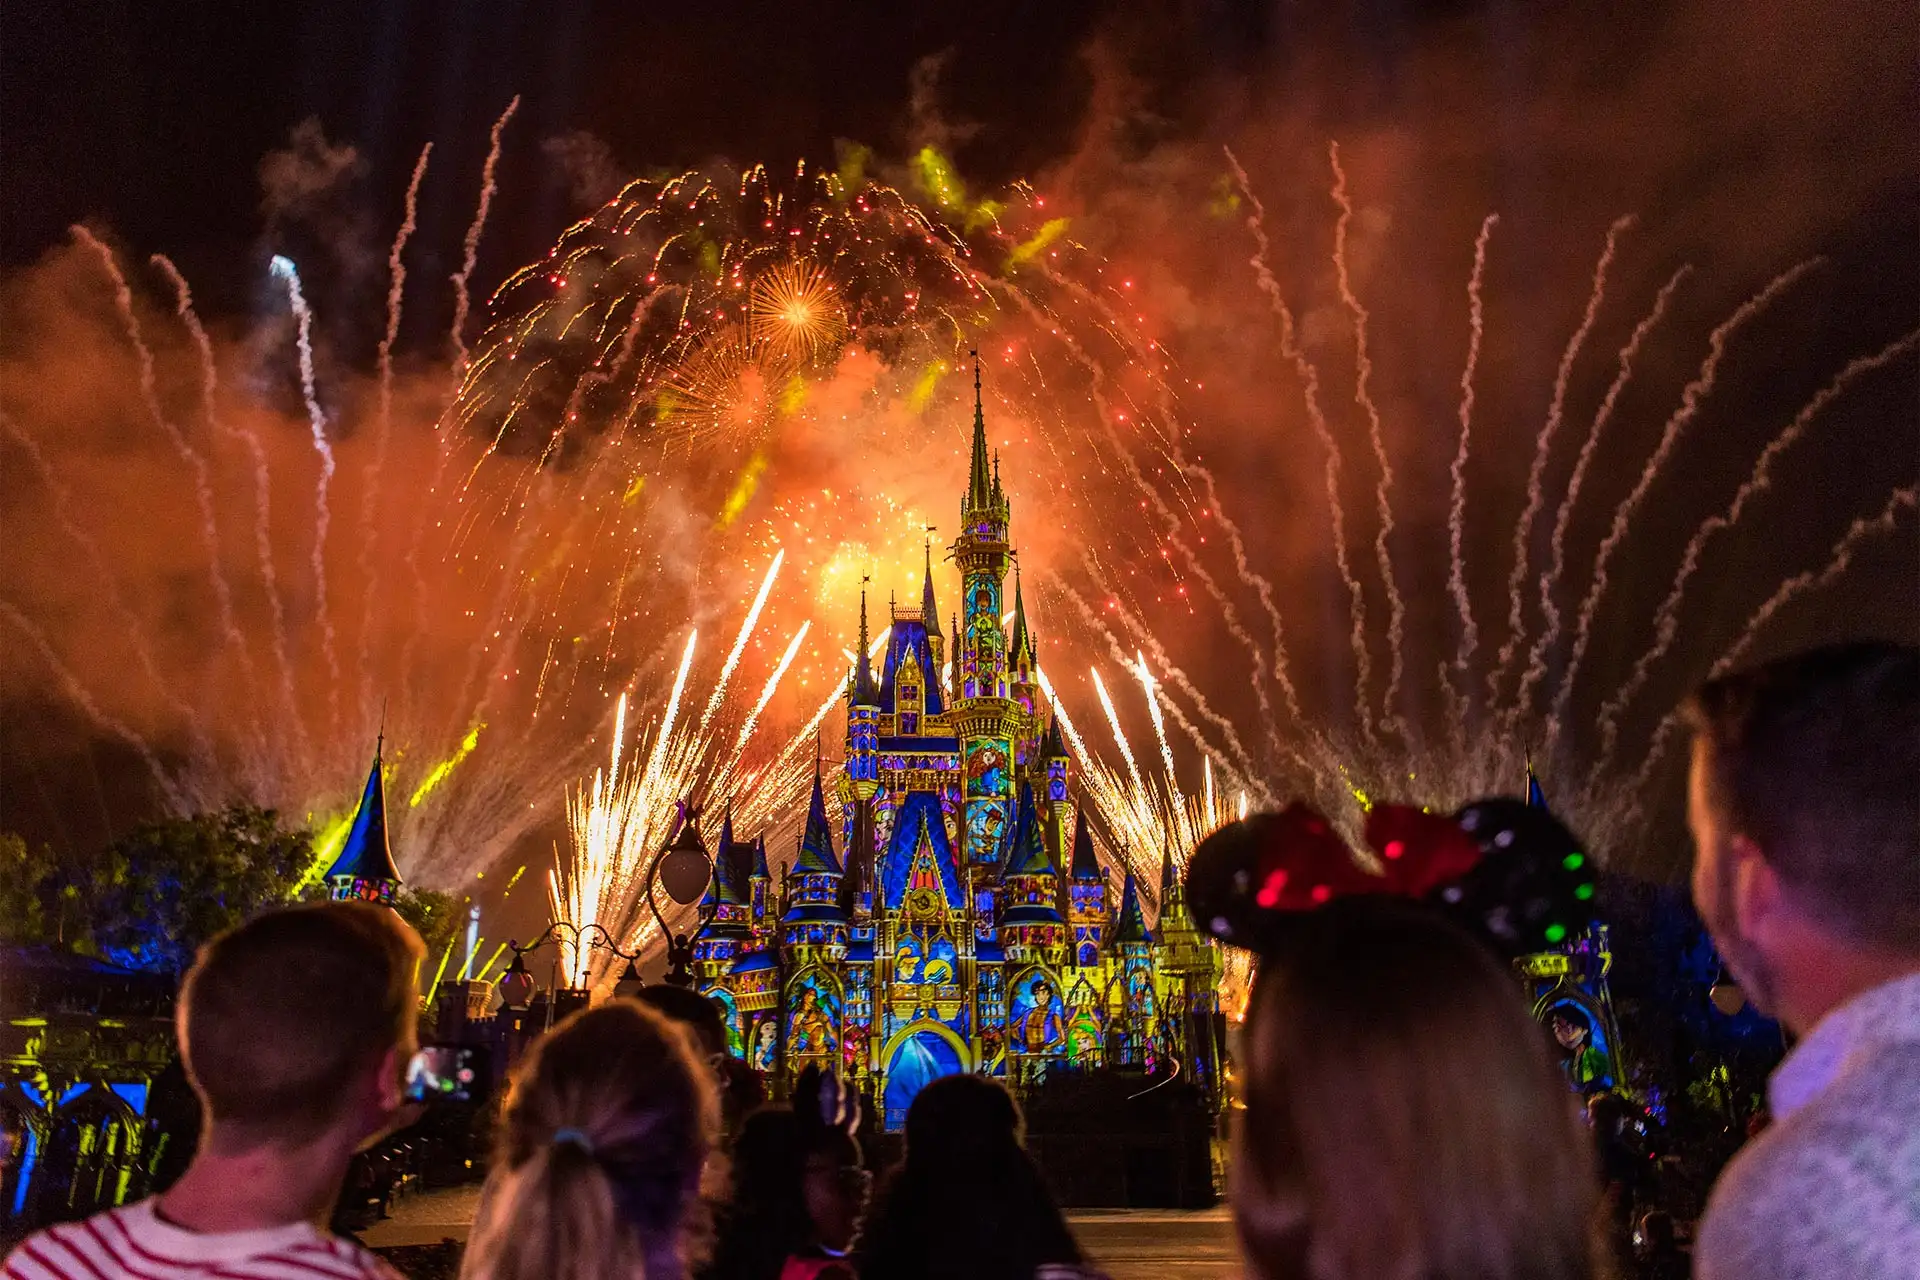 'Happily Ever After' at Magic Kingdom Park.